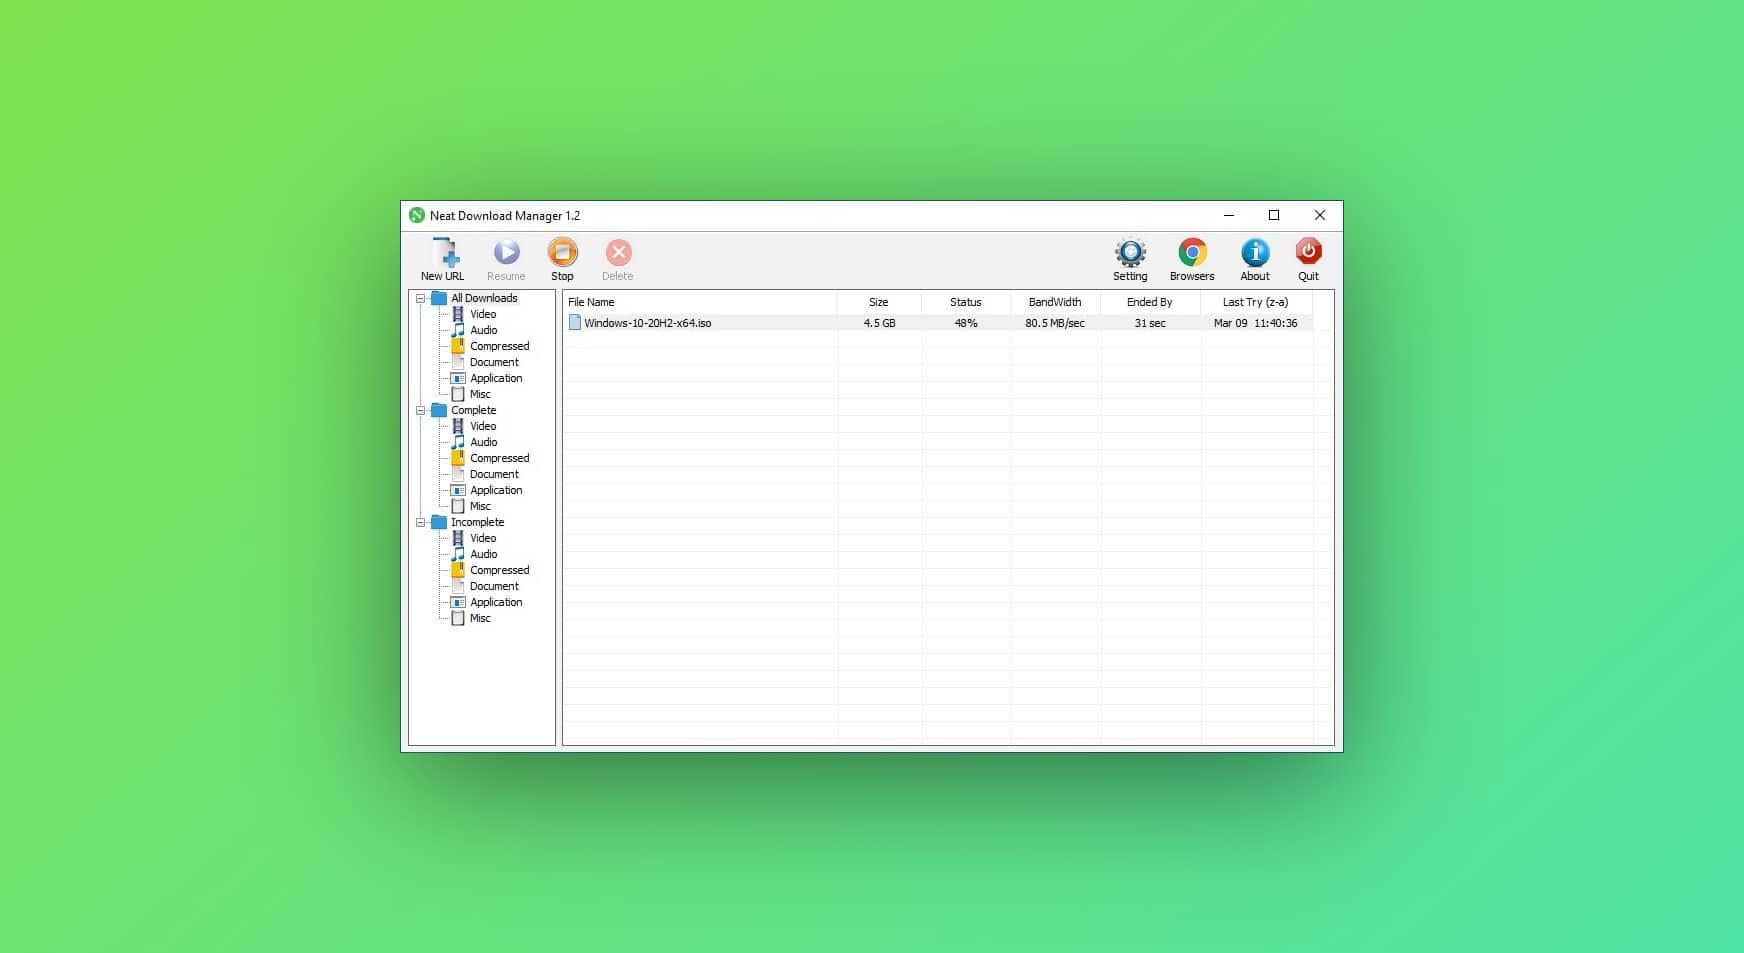 neatdownload manager